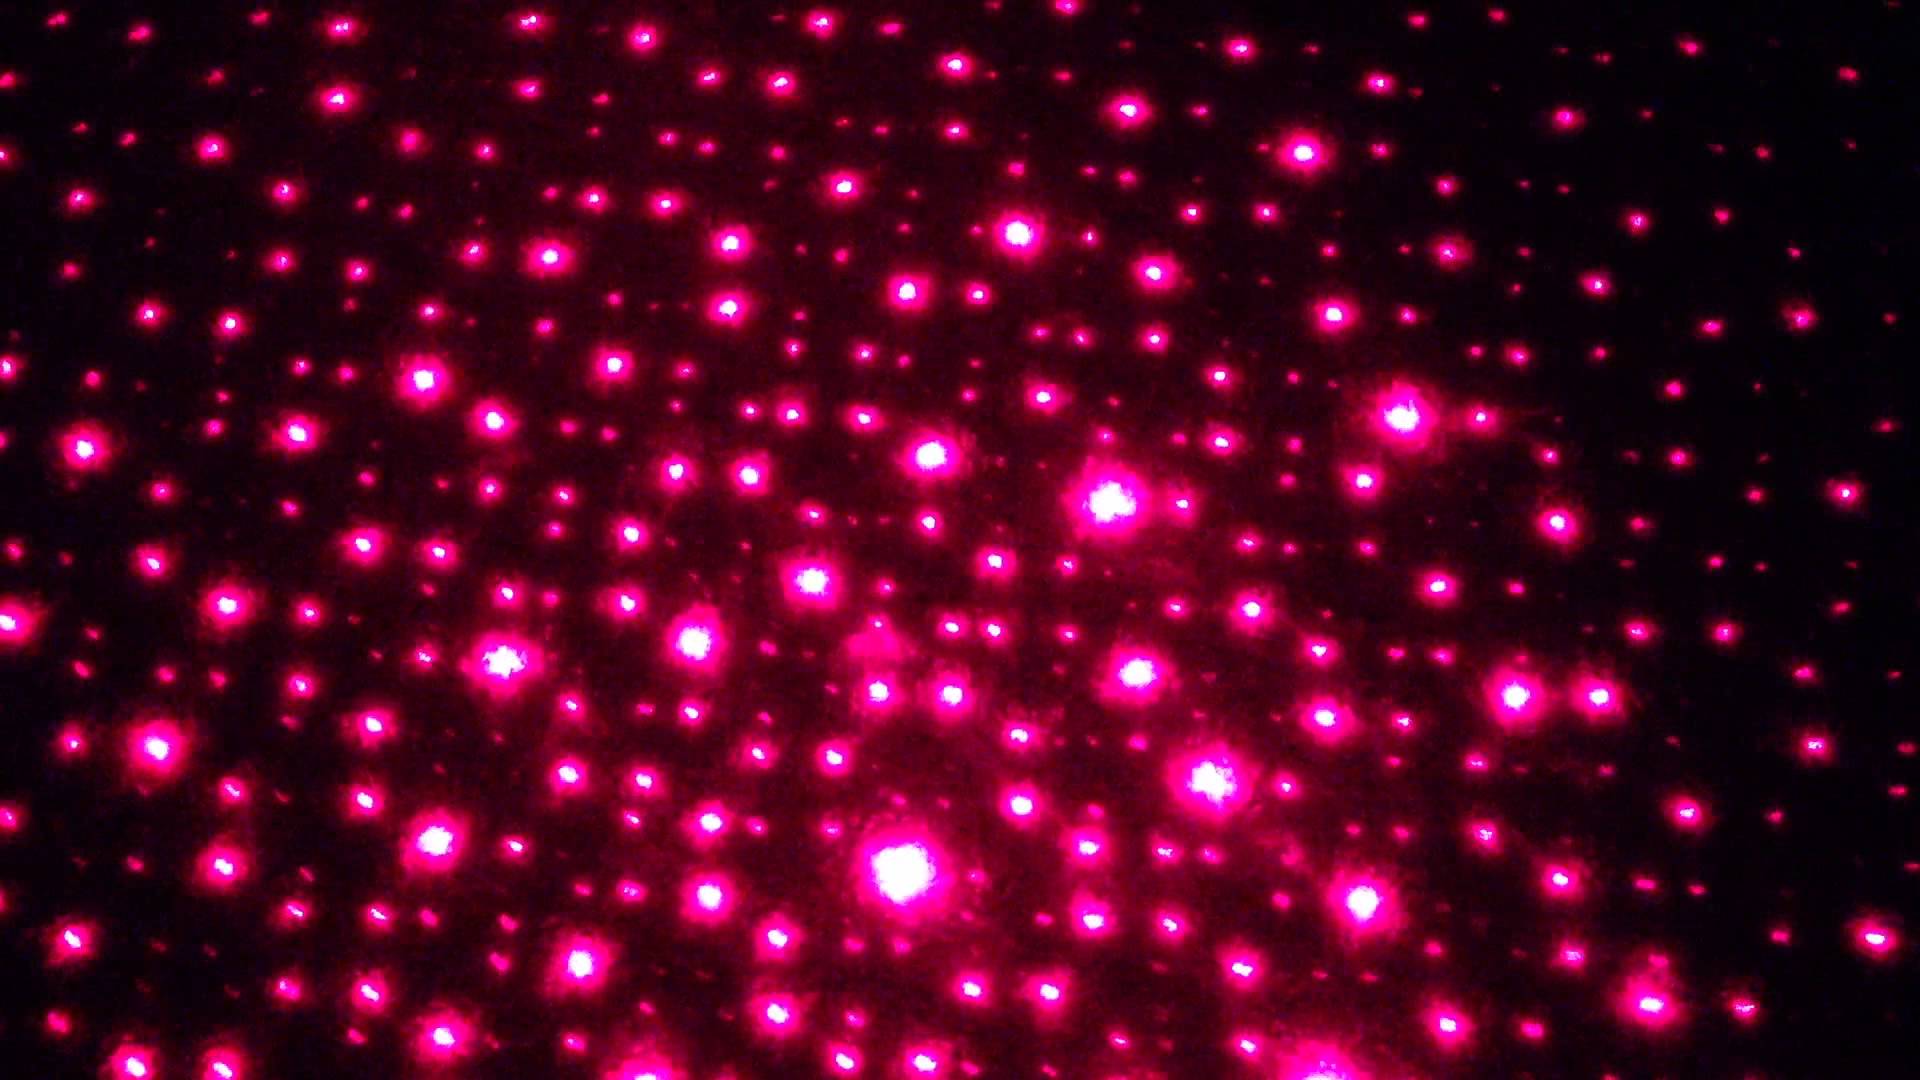 Red Laser with cool Light Patterns! - YouTube